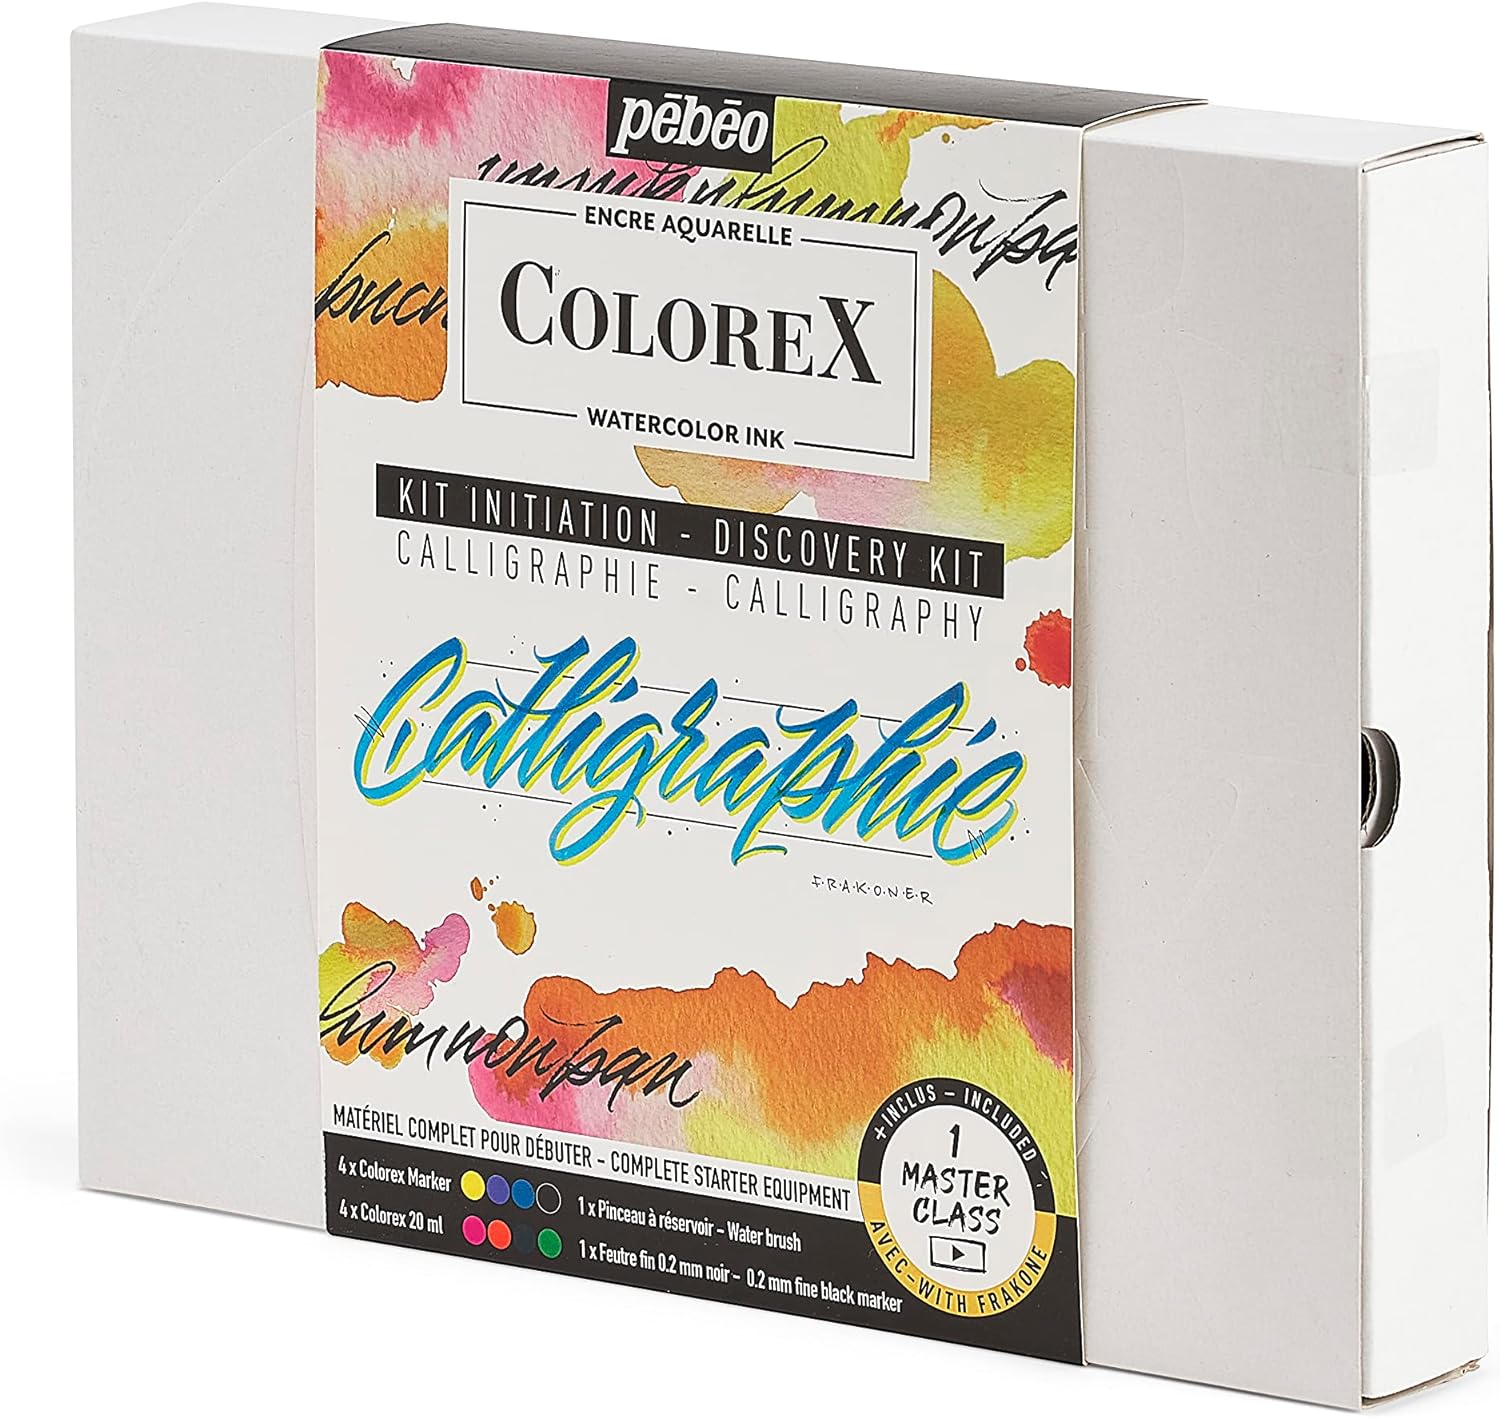 Pebeo - Inks for Design - Colorex Calligraphy Discovery Set